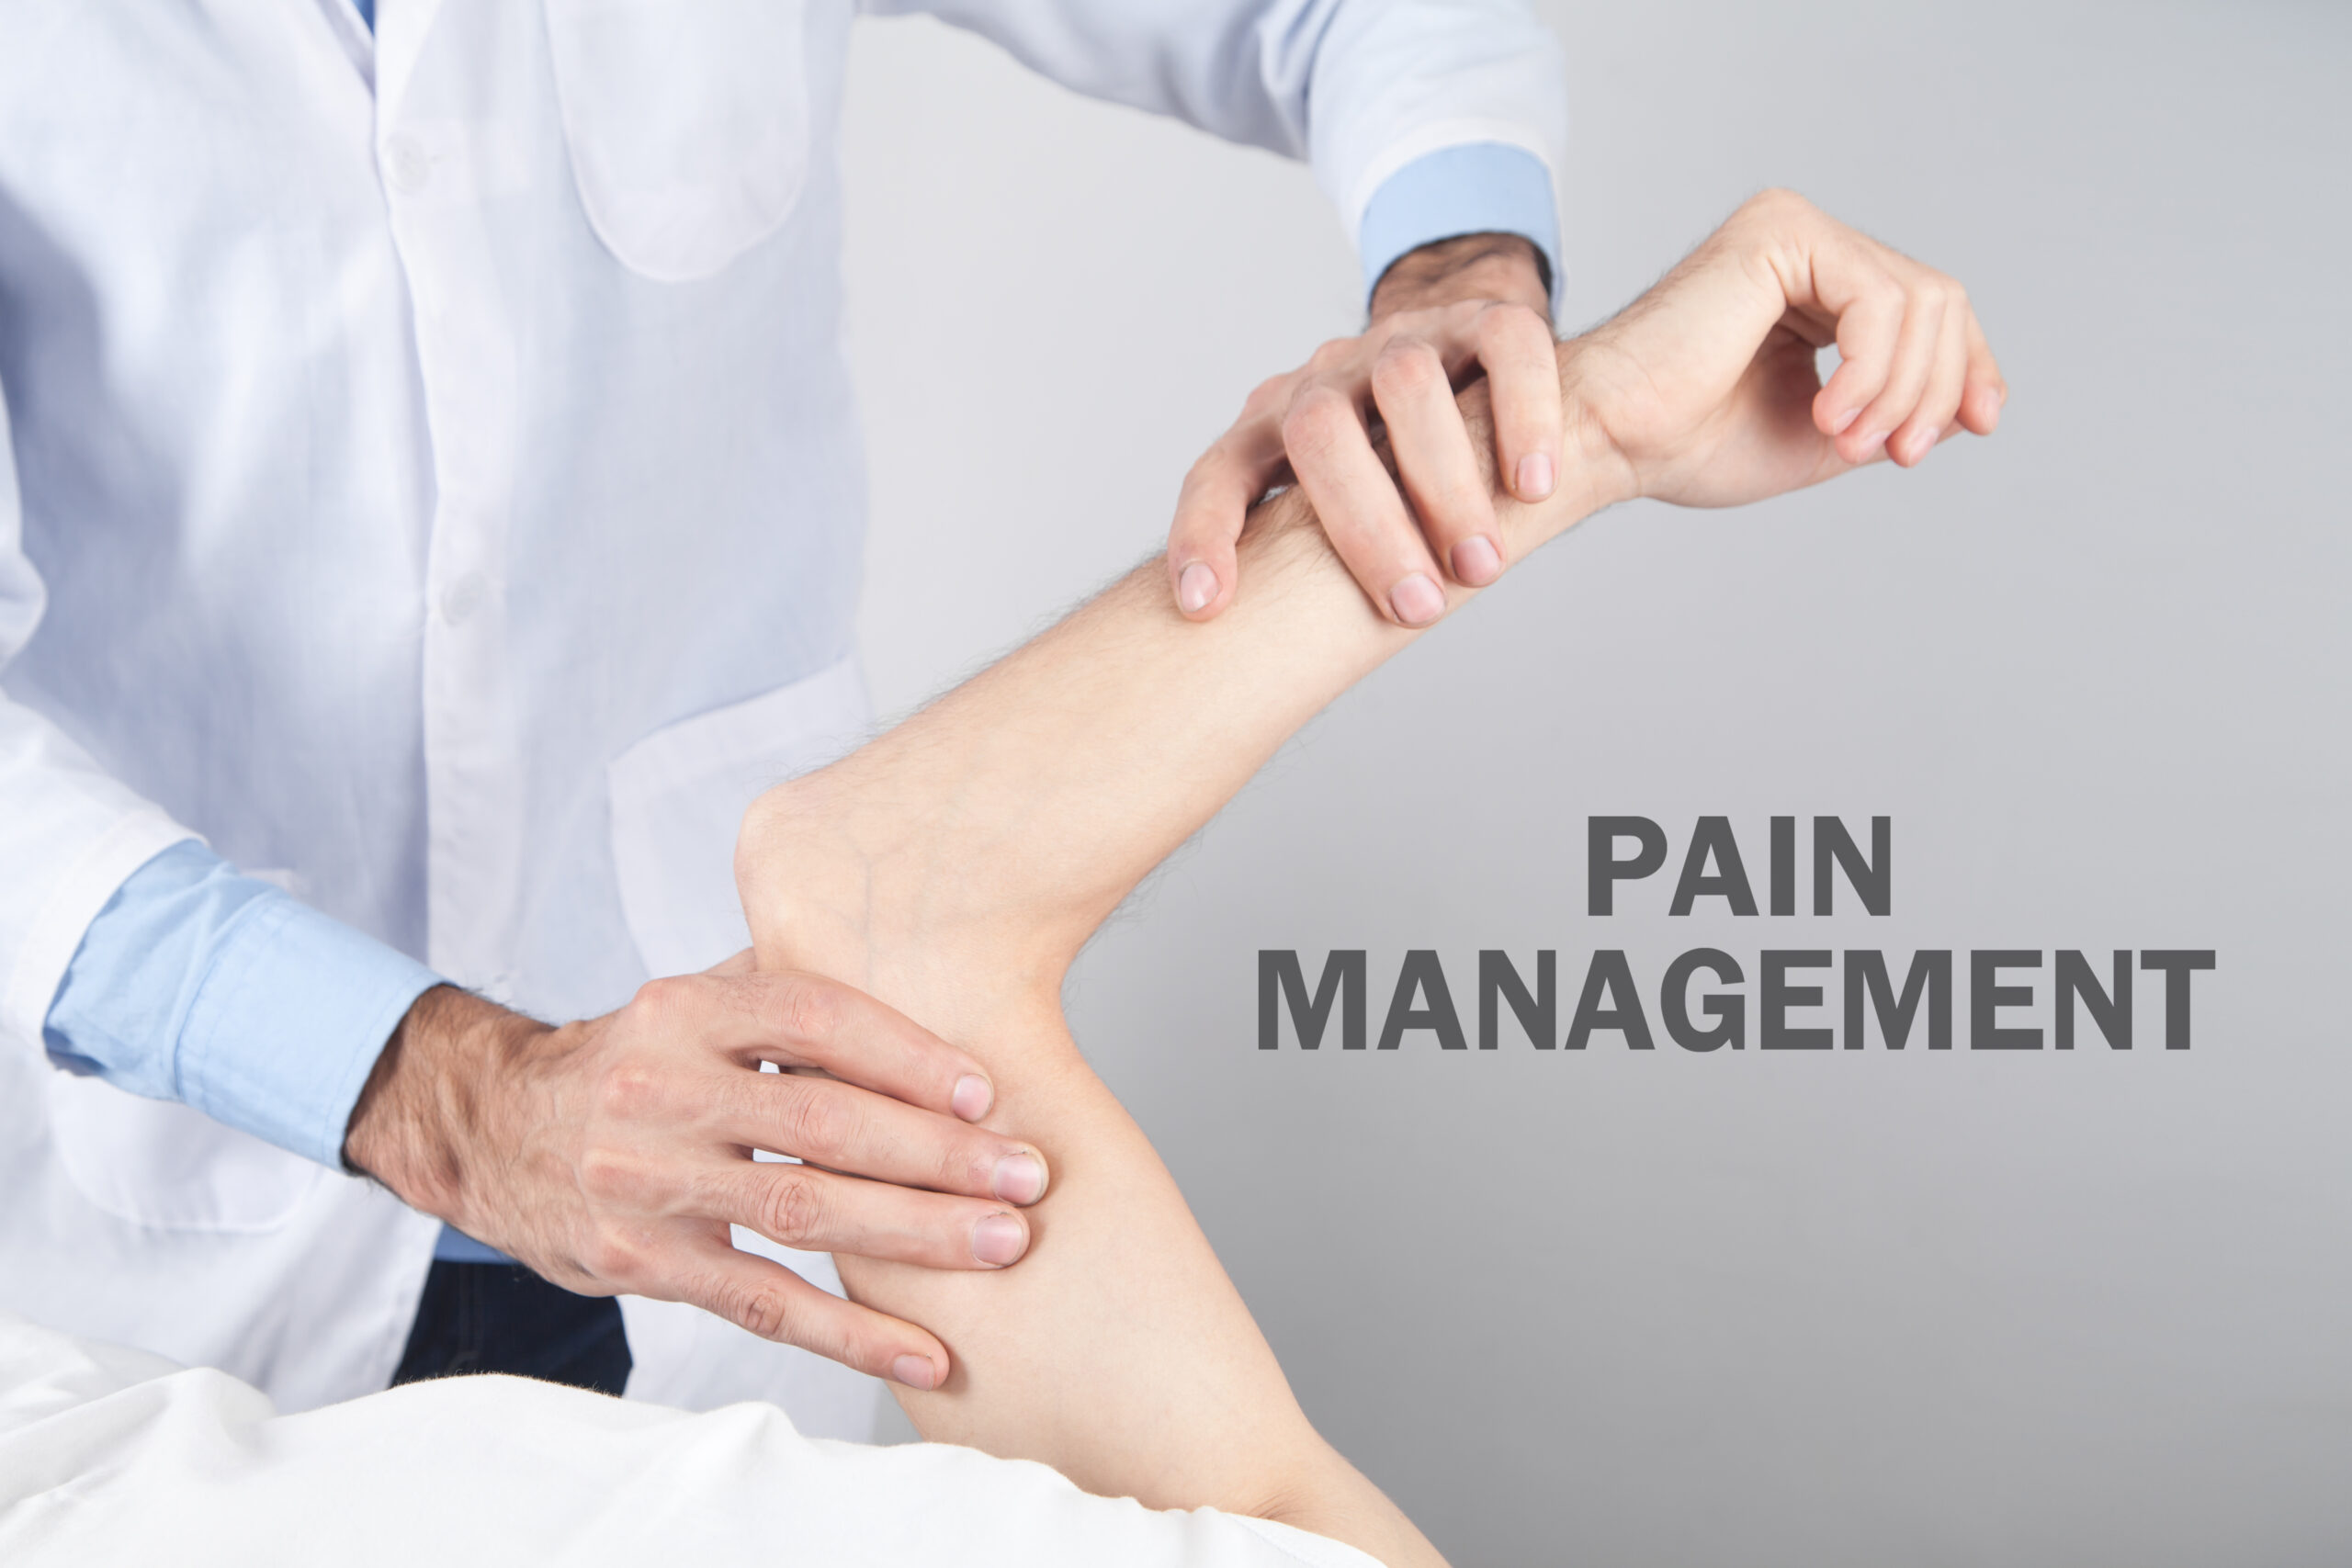 A Pain Management Specialist’s Guide to Painless Healthcare